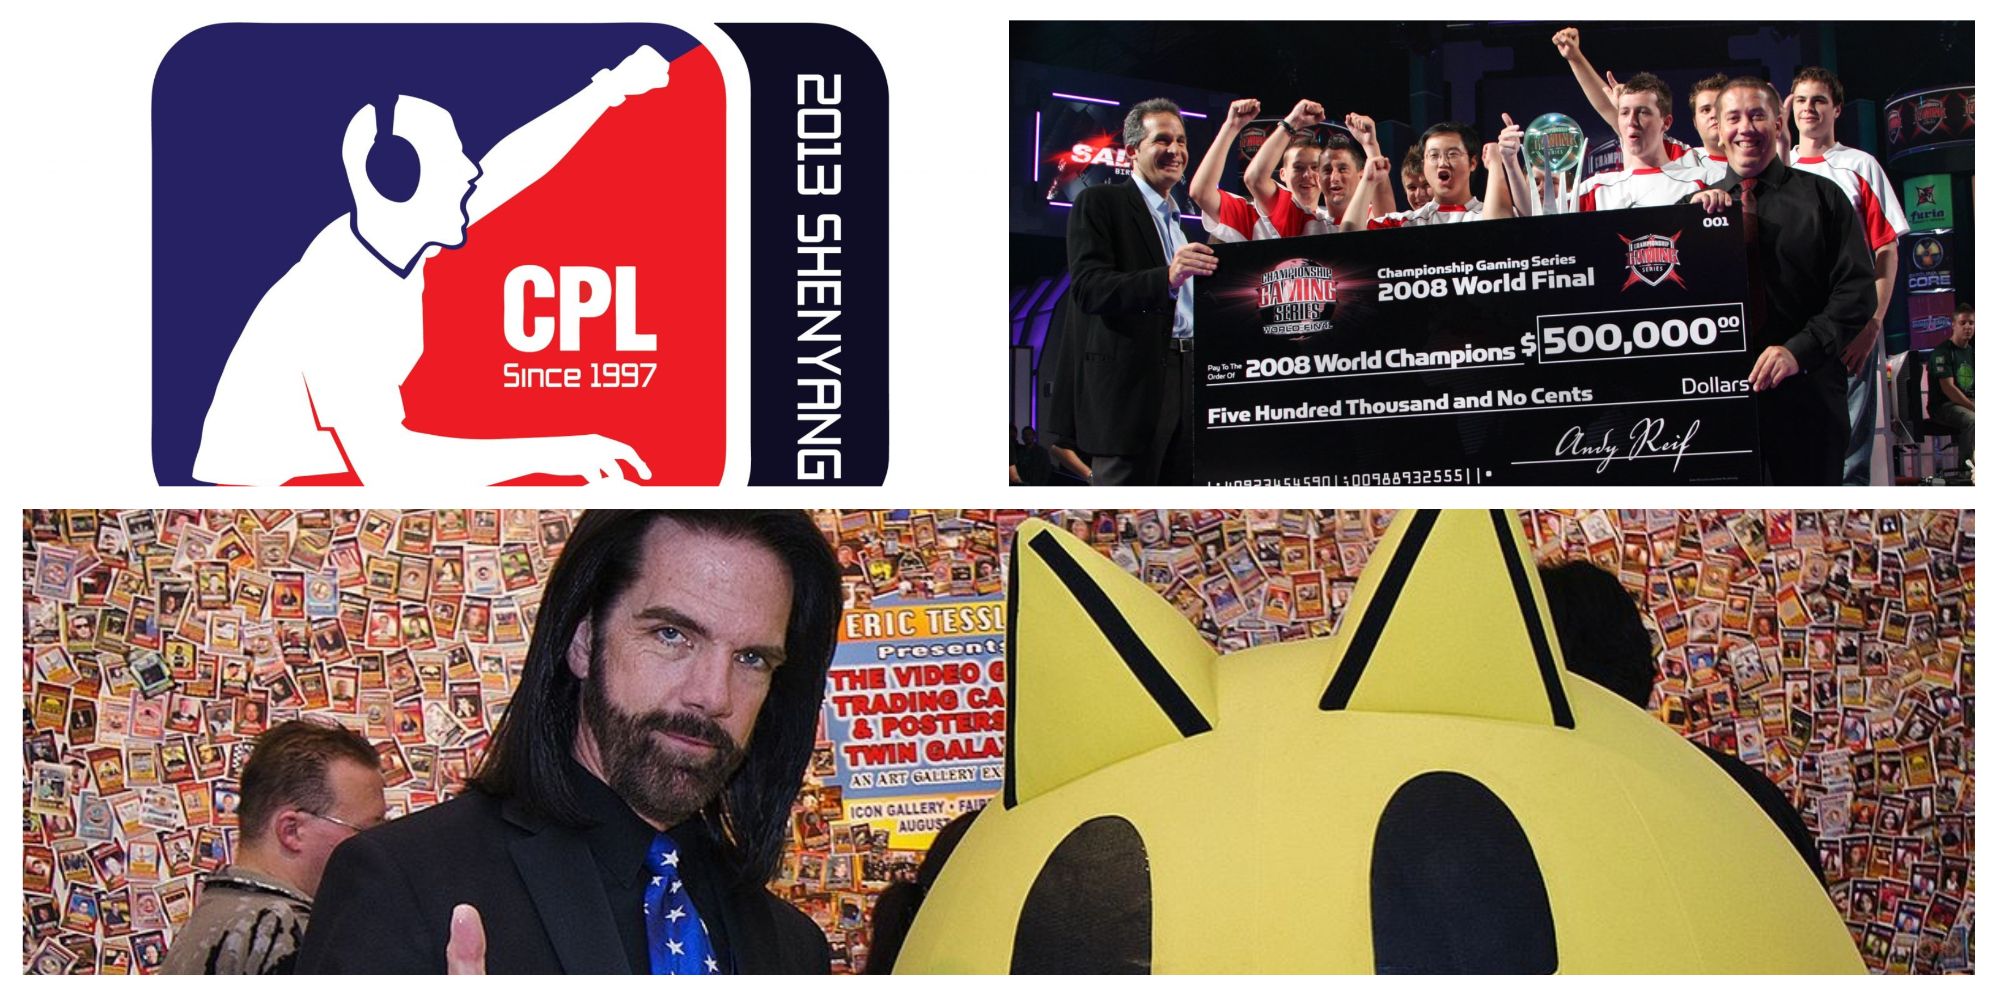 Defunct eSports- CPL Championship Gaming Series Billy Mitchell